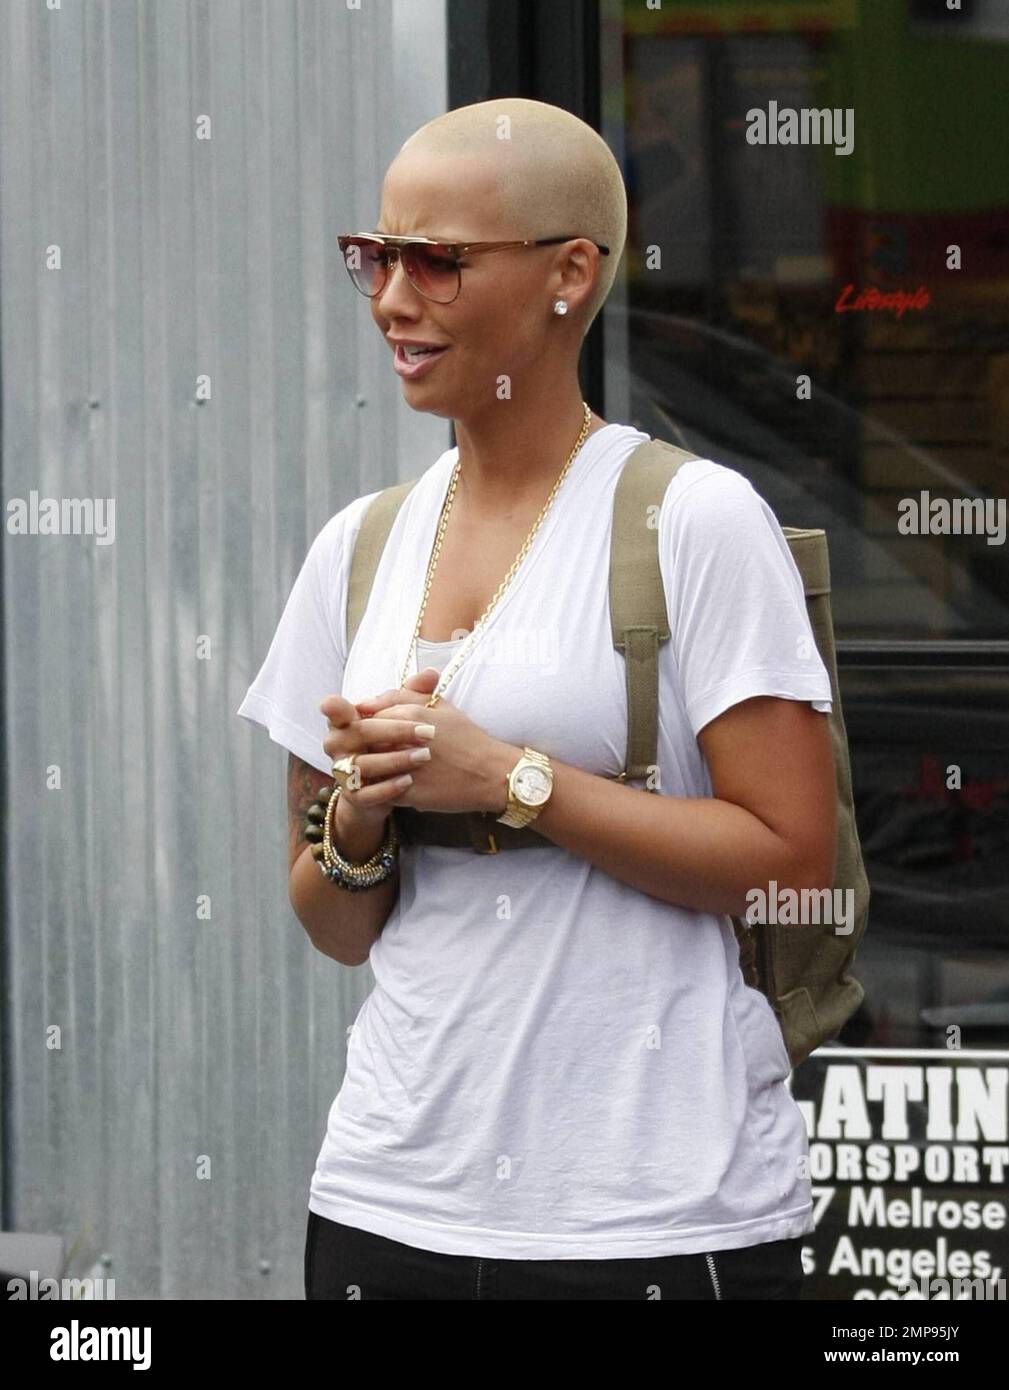 Ex-girlfriend of musician Kanye West, model and socialite Amber Rose shows off her busty figure in a white top as she films scenes for a reality show at Platinum Motorsports. Los